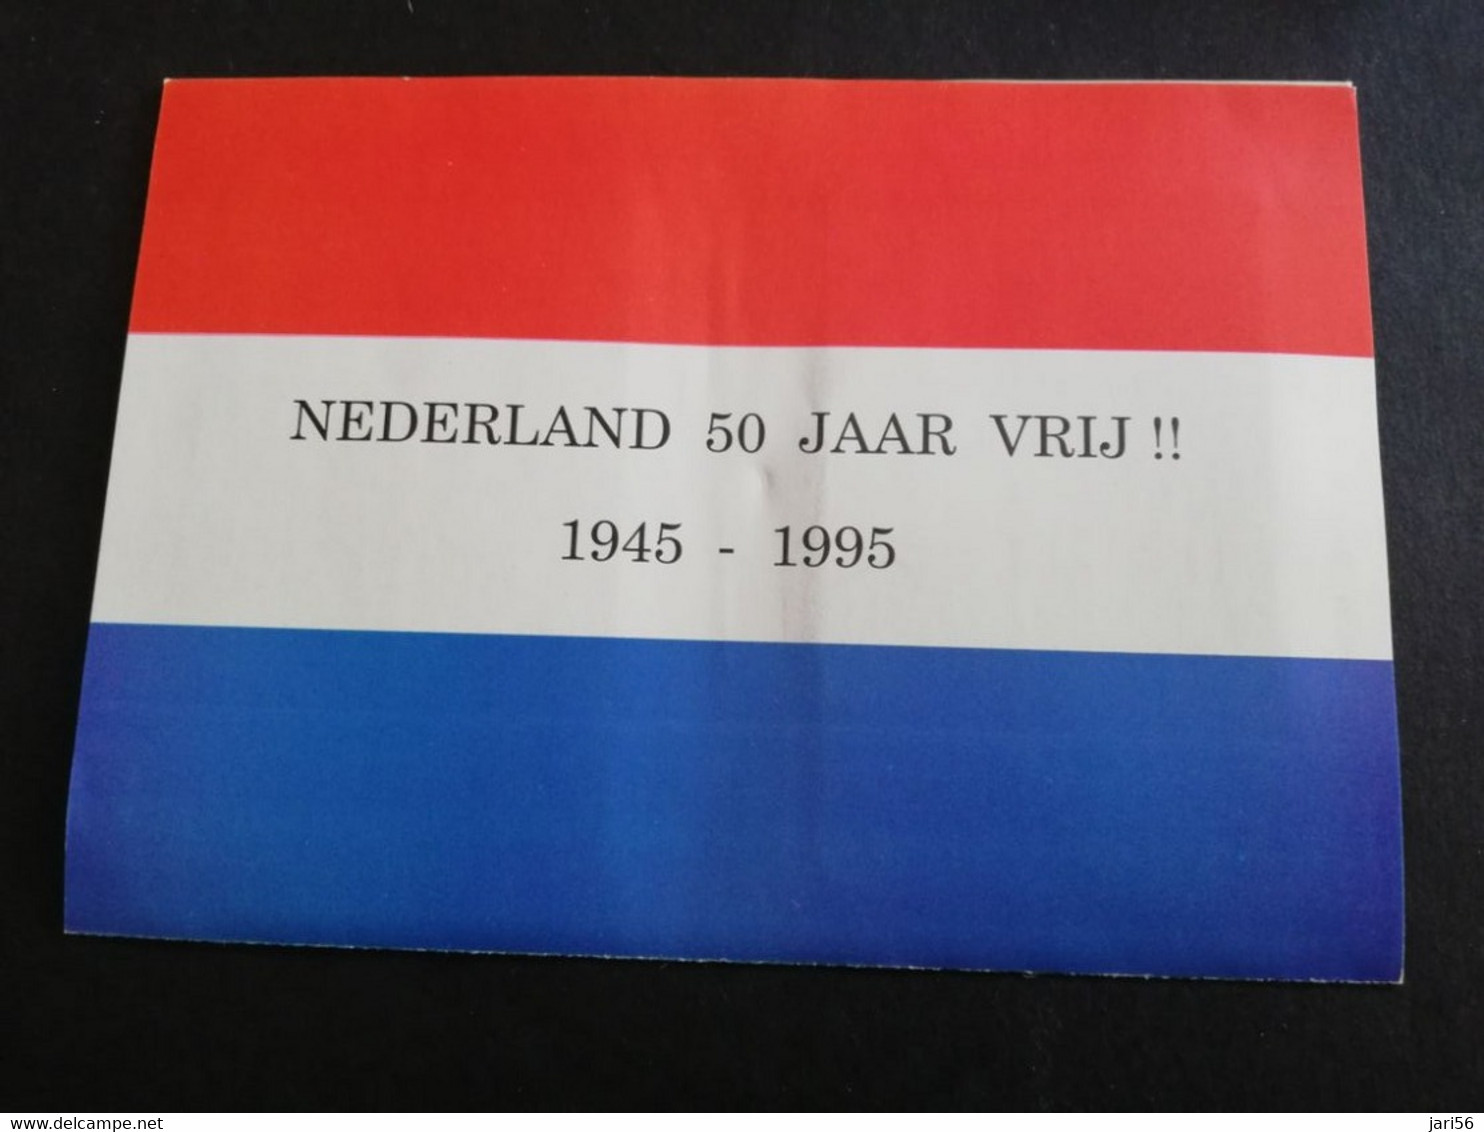 NETHERLANDS  CHIPCARD   2X HFL 5.00   SPITFIRE  AIRPLANES       MINT CARD    ** 6215** - Unclassified